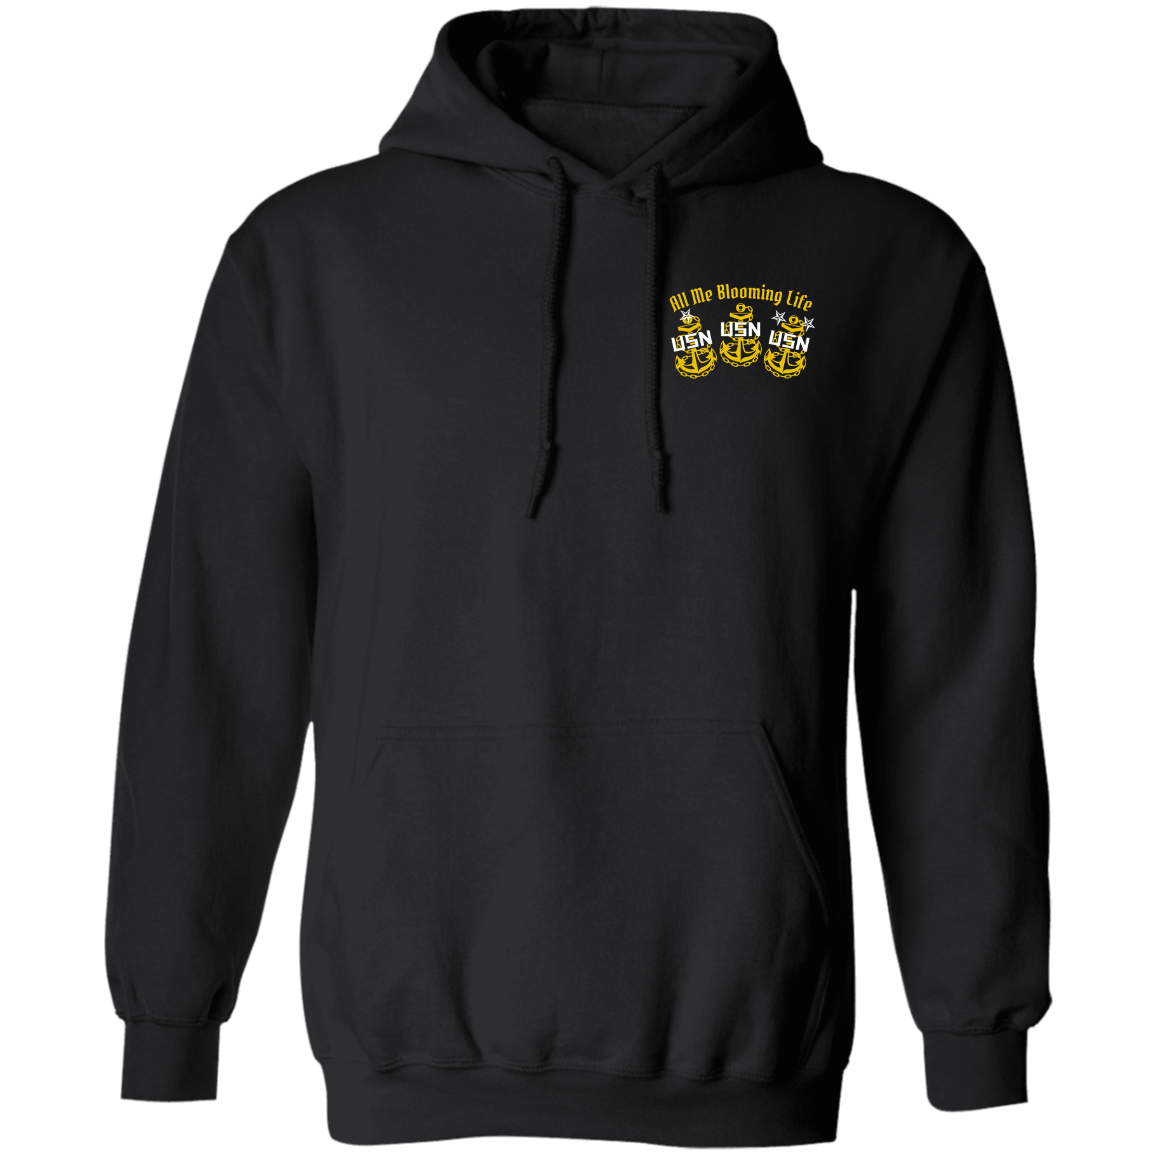 Me Mother and Father Pullover Hoodie